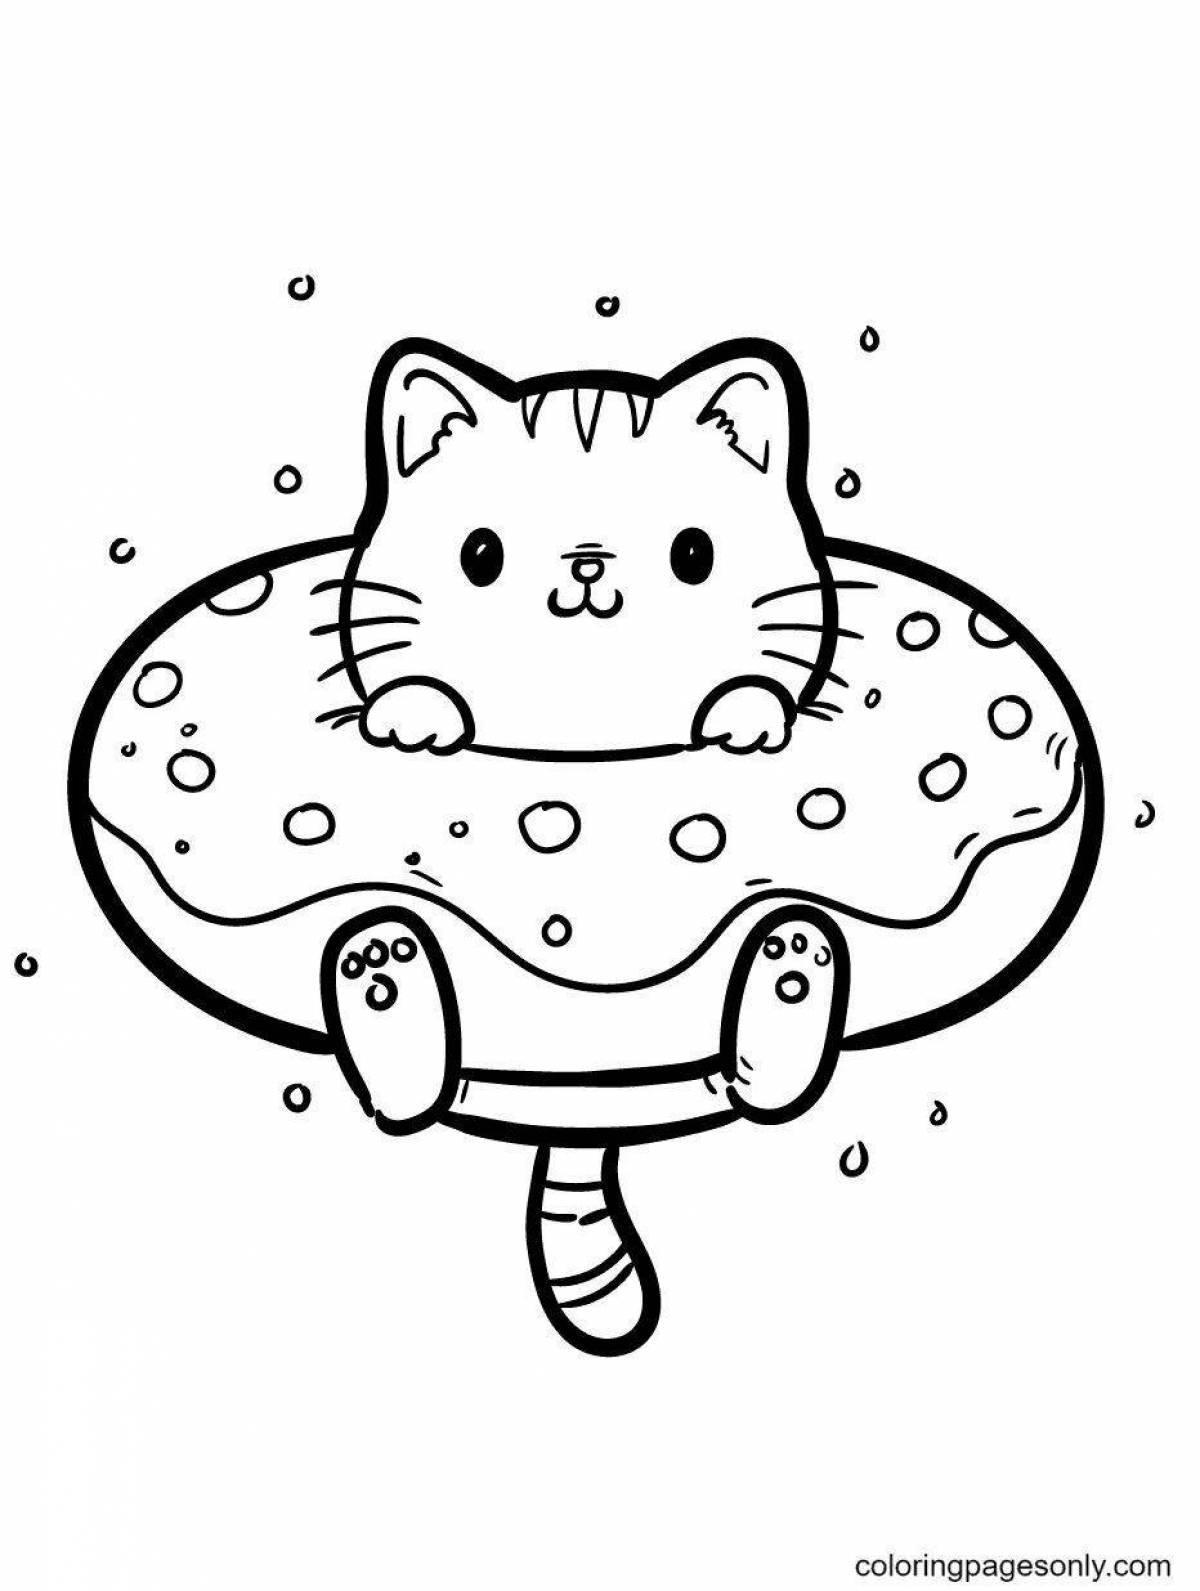 Adorable kitten in a cup coloring book